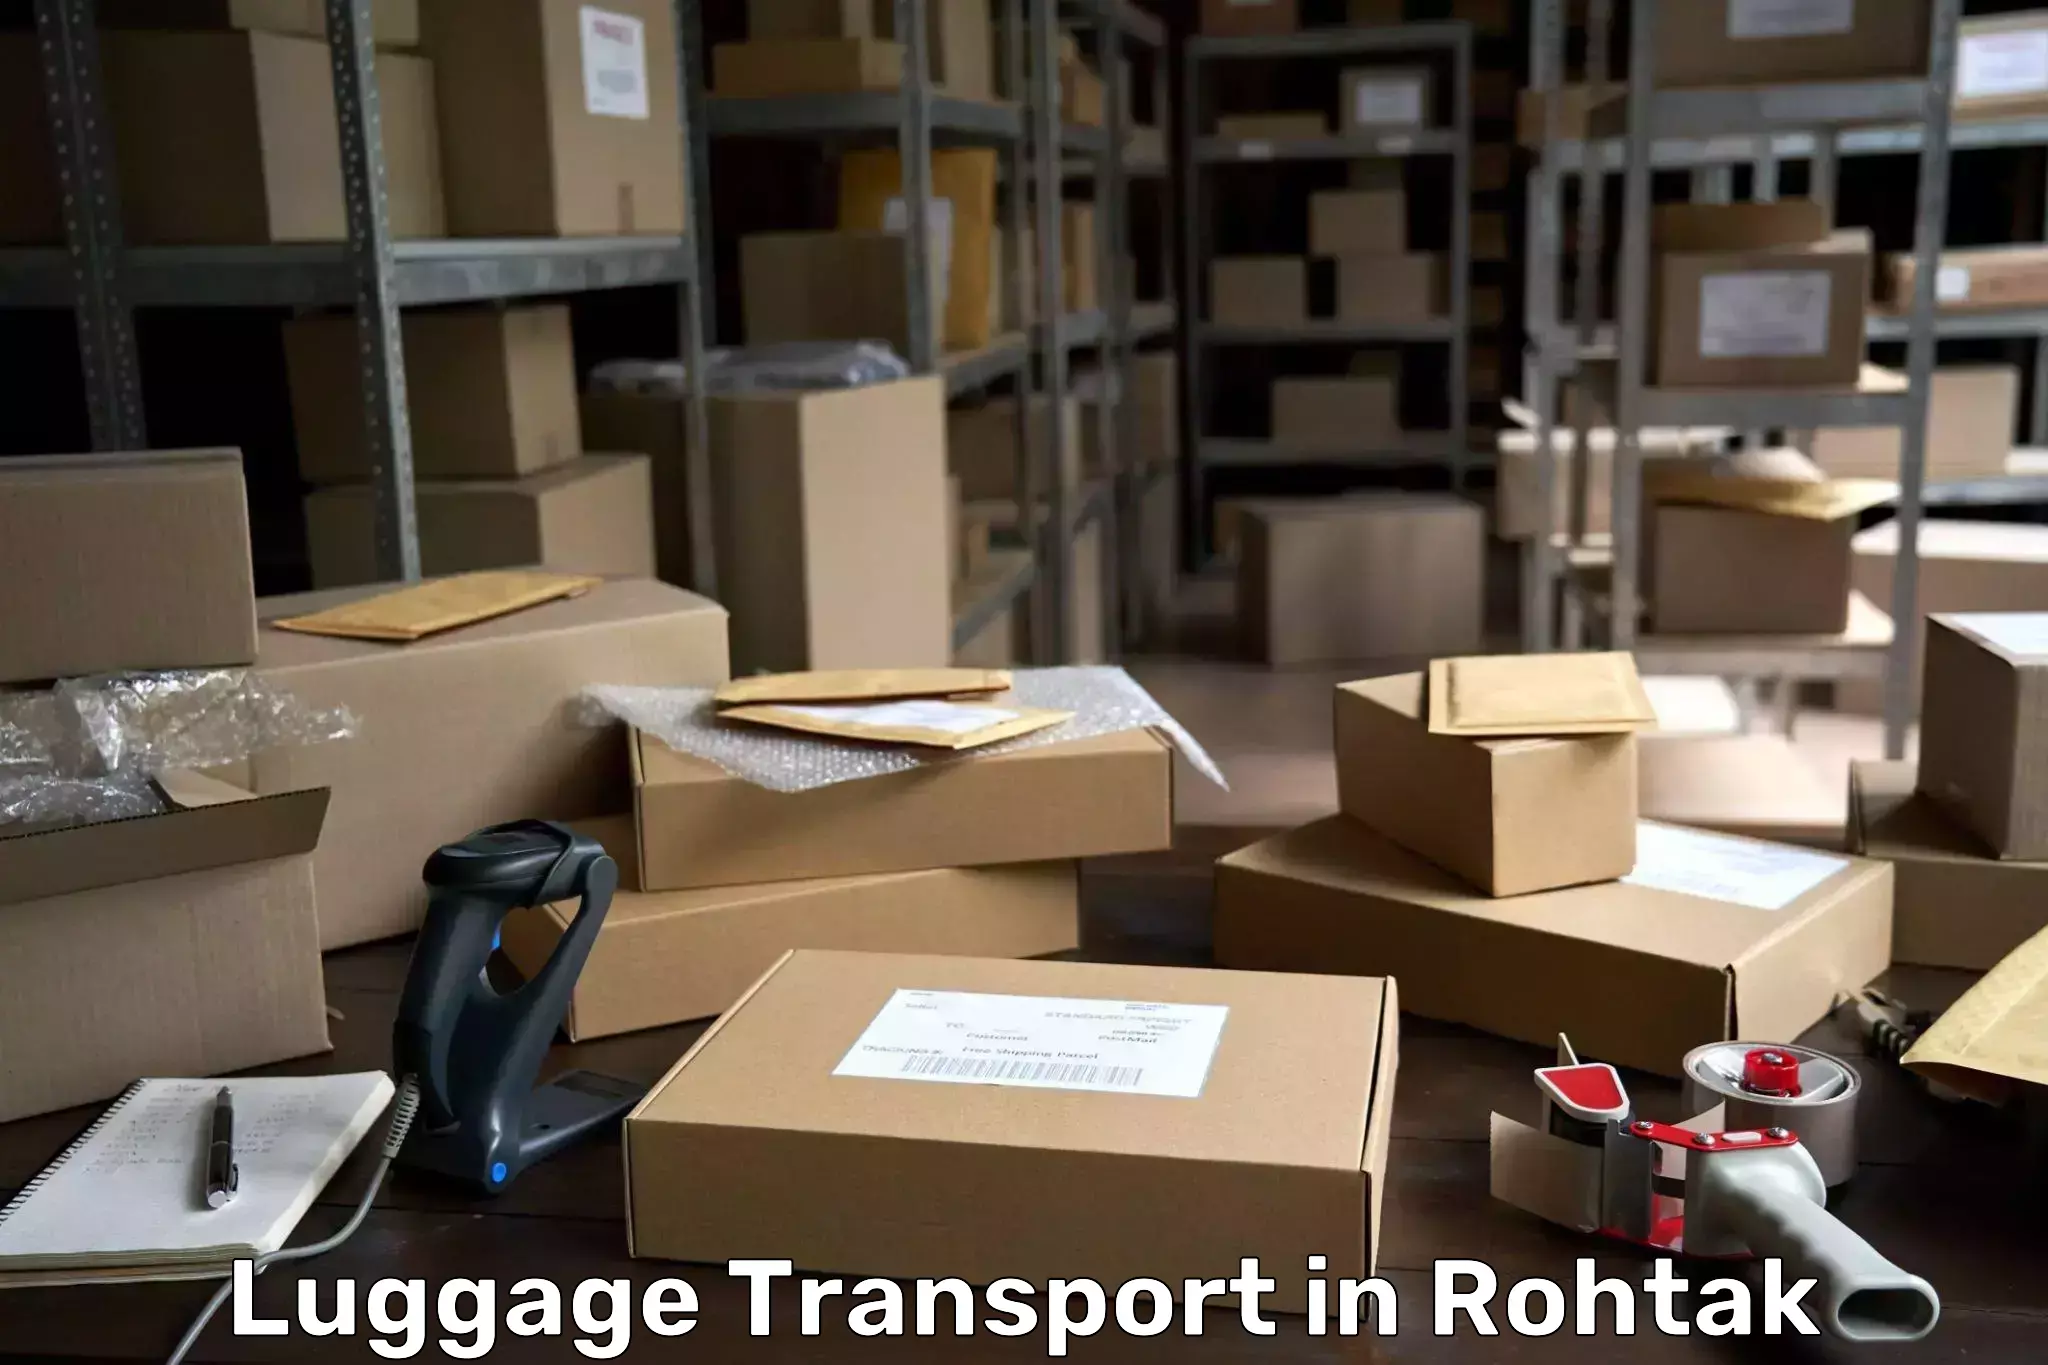 Baggage transport services in Rohtak